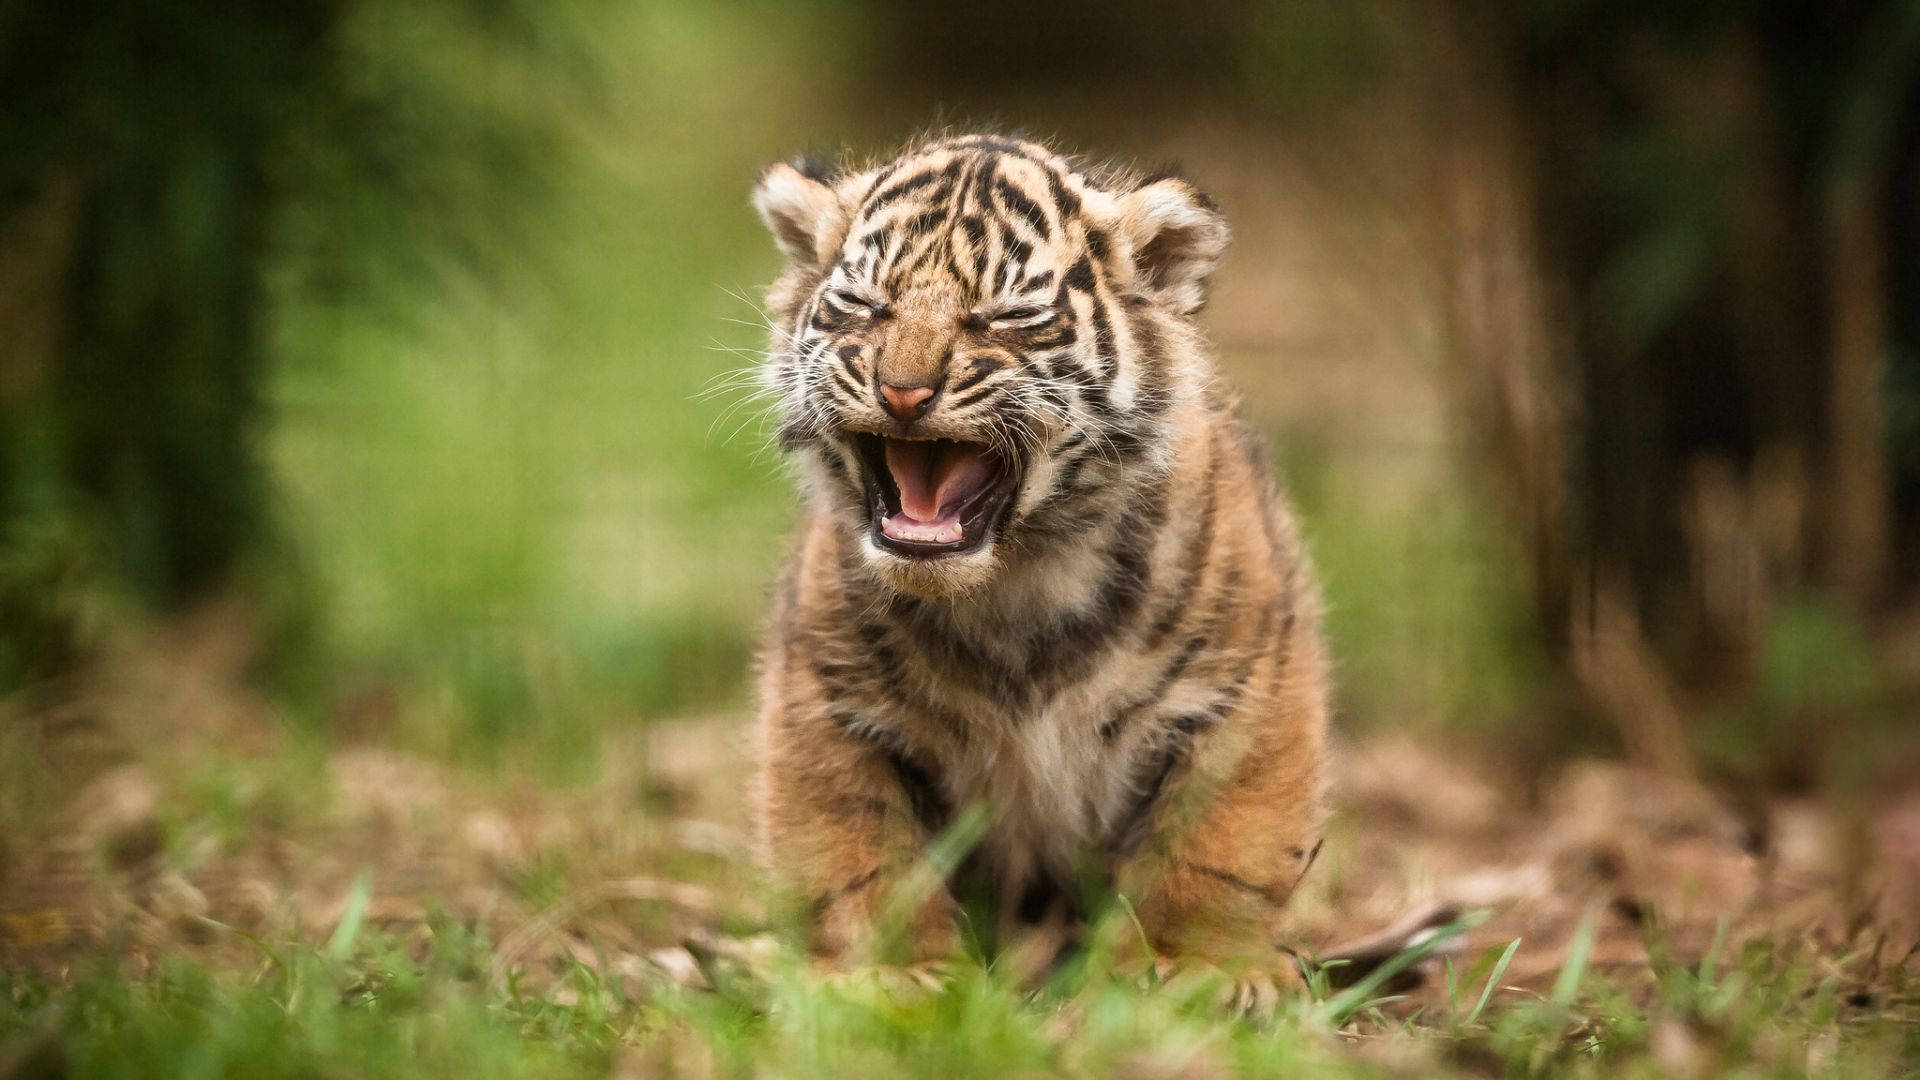 Baby Tiger Cute Growl Background